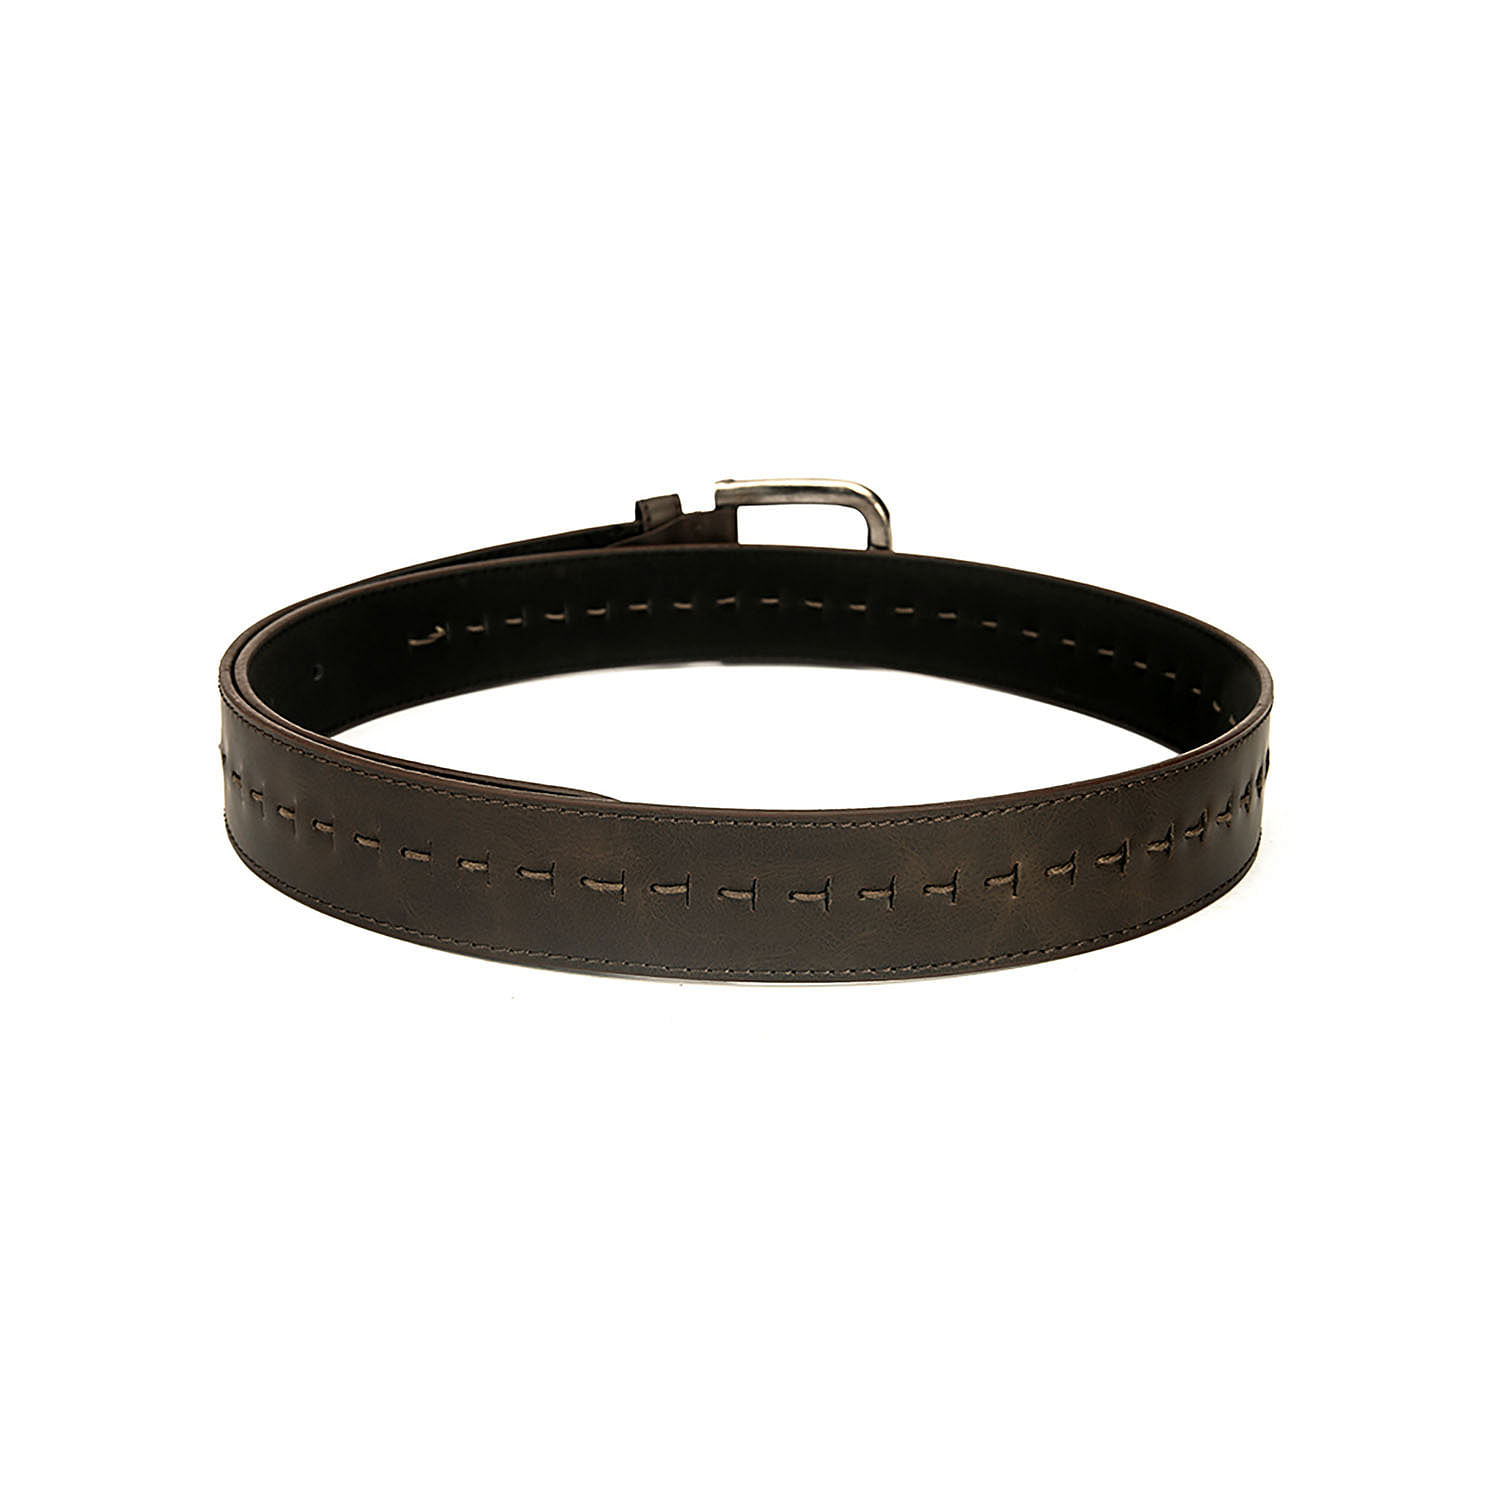 Men's Casual Textured Perforated Belt BRN - LZ-CB-103